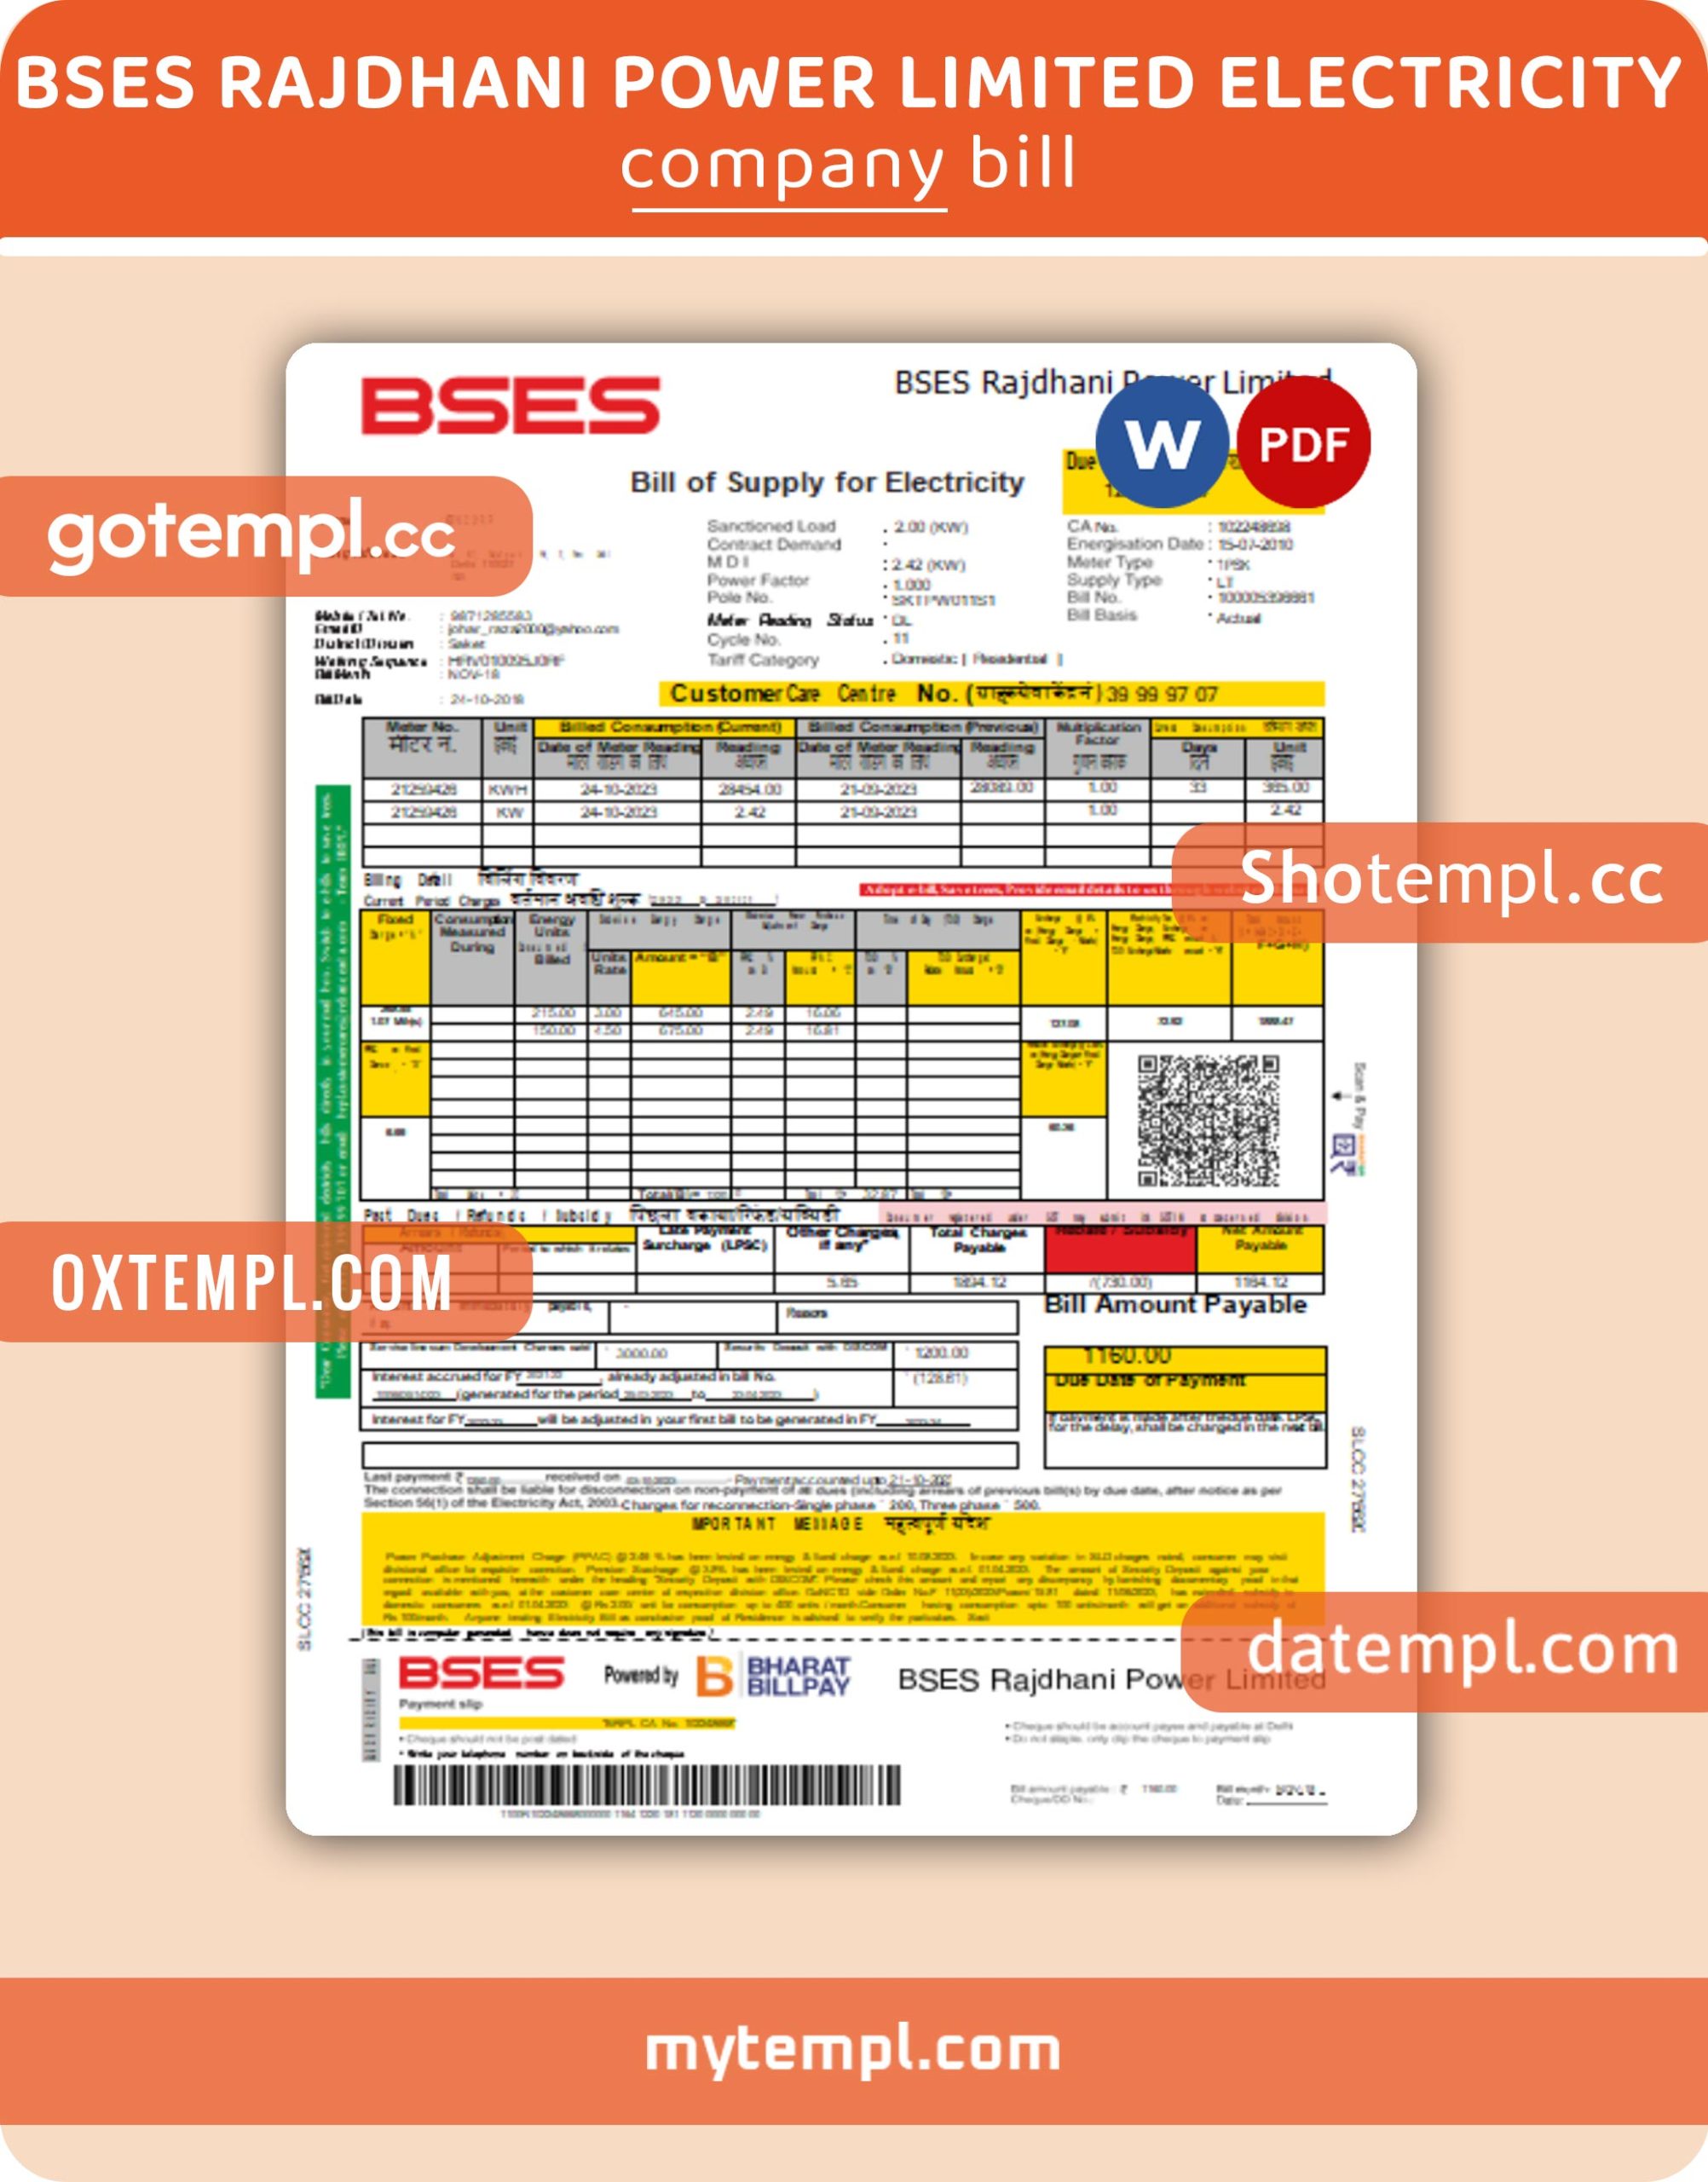 BSES Rajdhani Power Limited electricity business utility bill, Word and PDF template